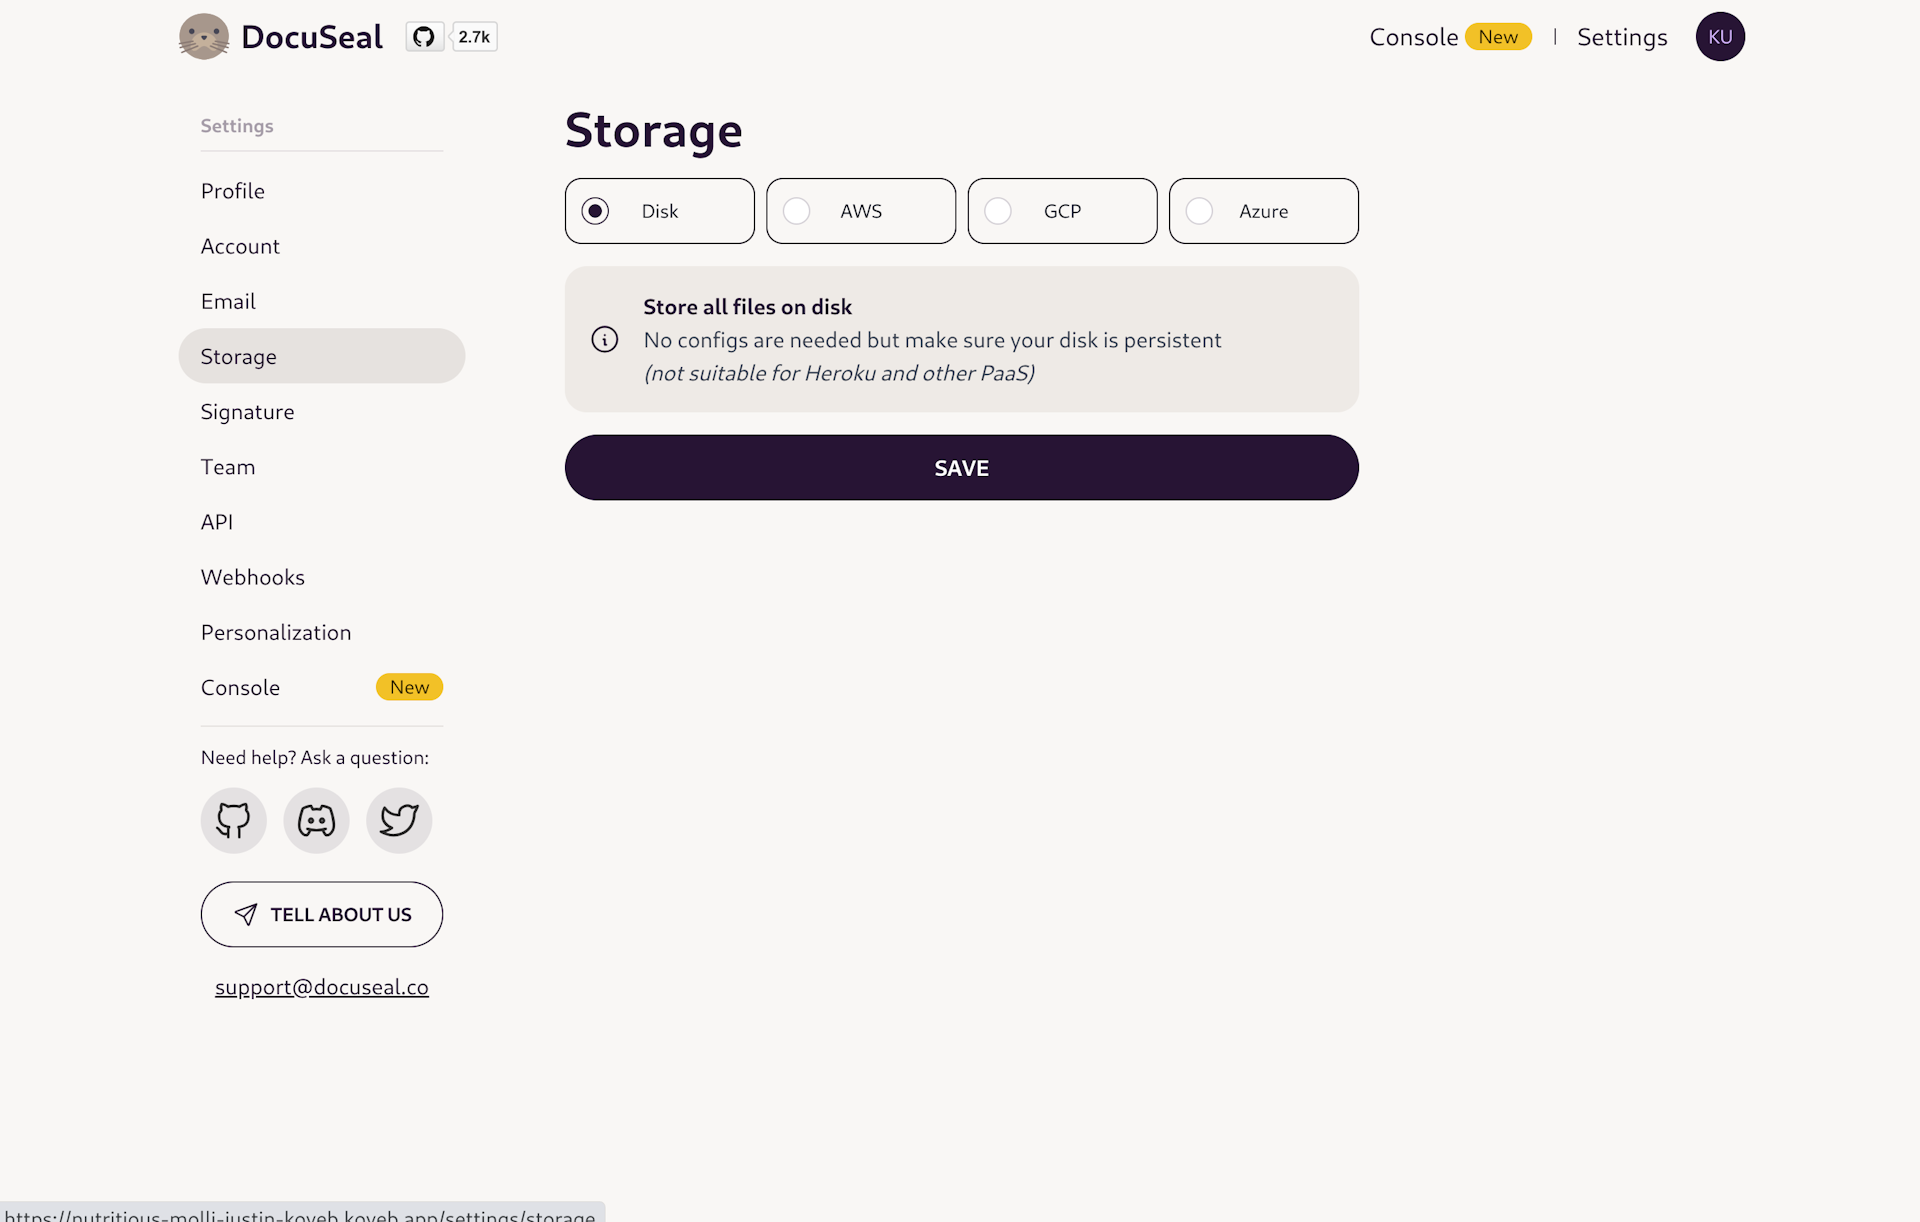 DocuSeal initial storage page